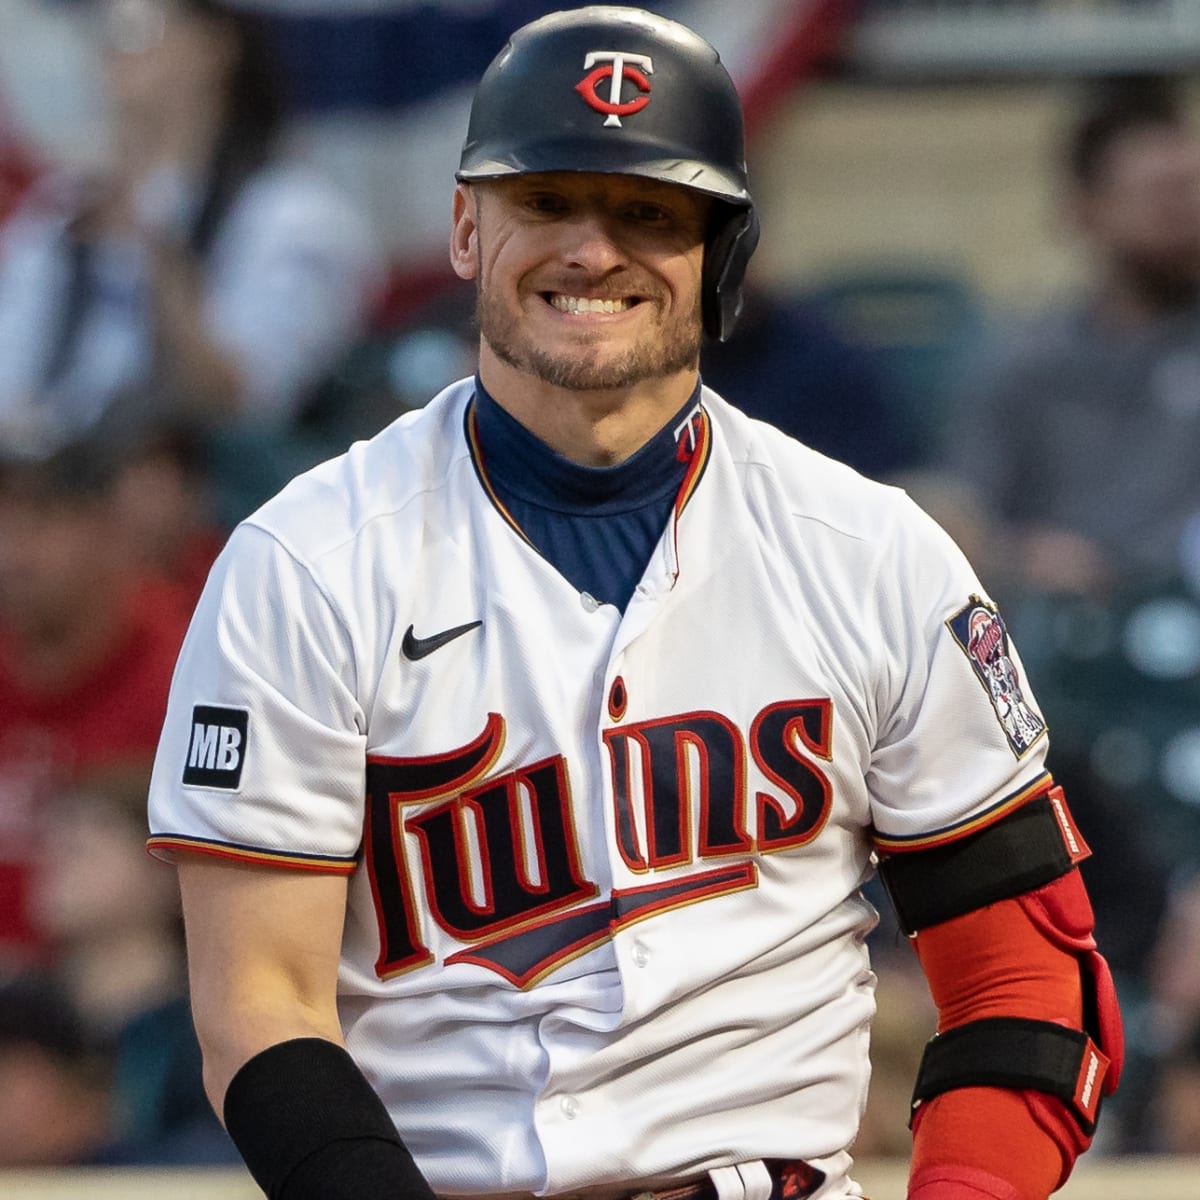 Yankees acquire former Blue Jay, AL MVP Josh Donaldson from Twins